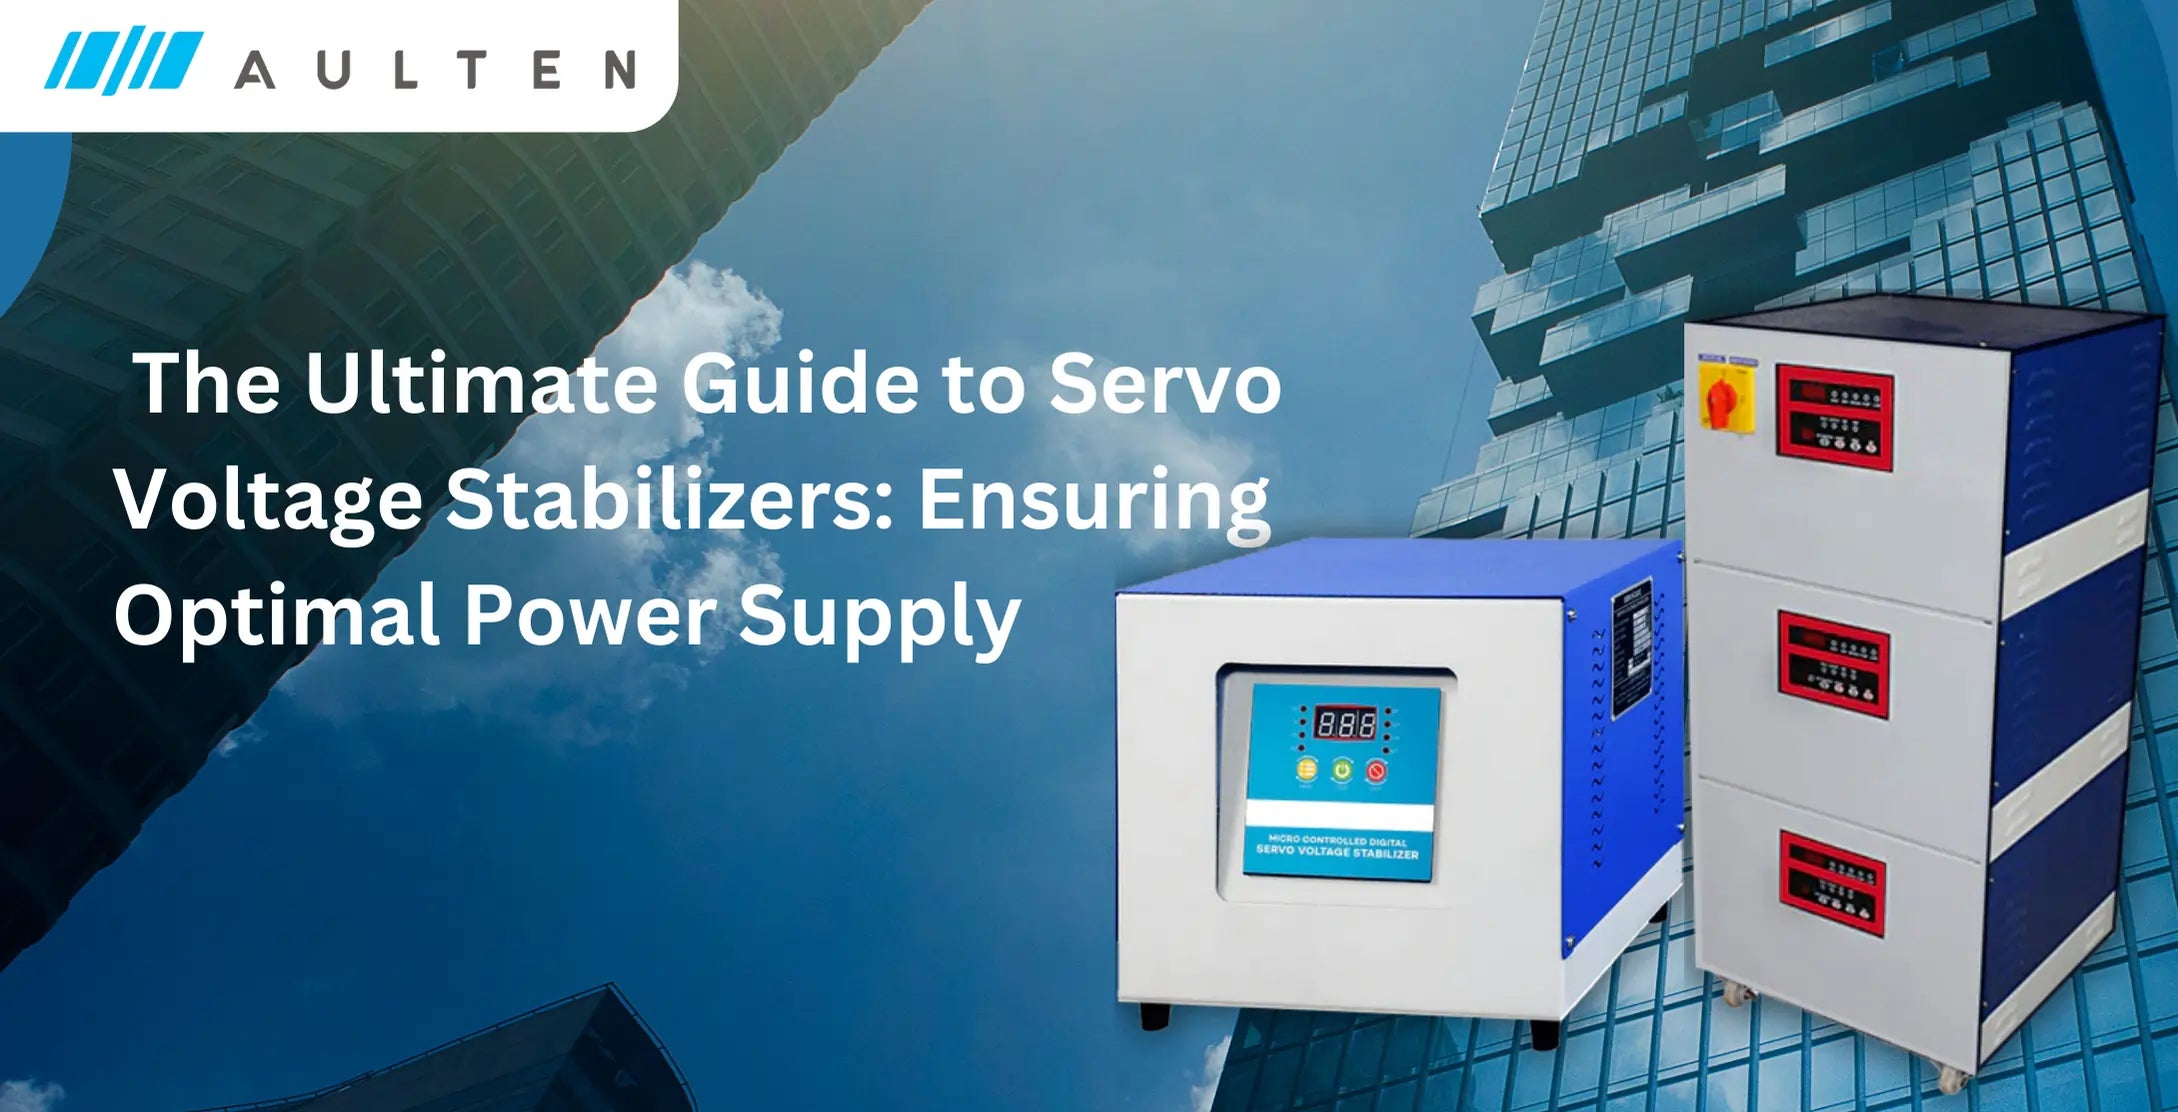 The Ultimate Guide to Servo Voltage Stabilizers: Ensuring Optimal Power Supply